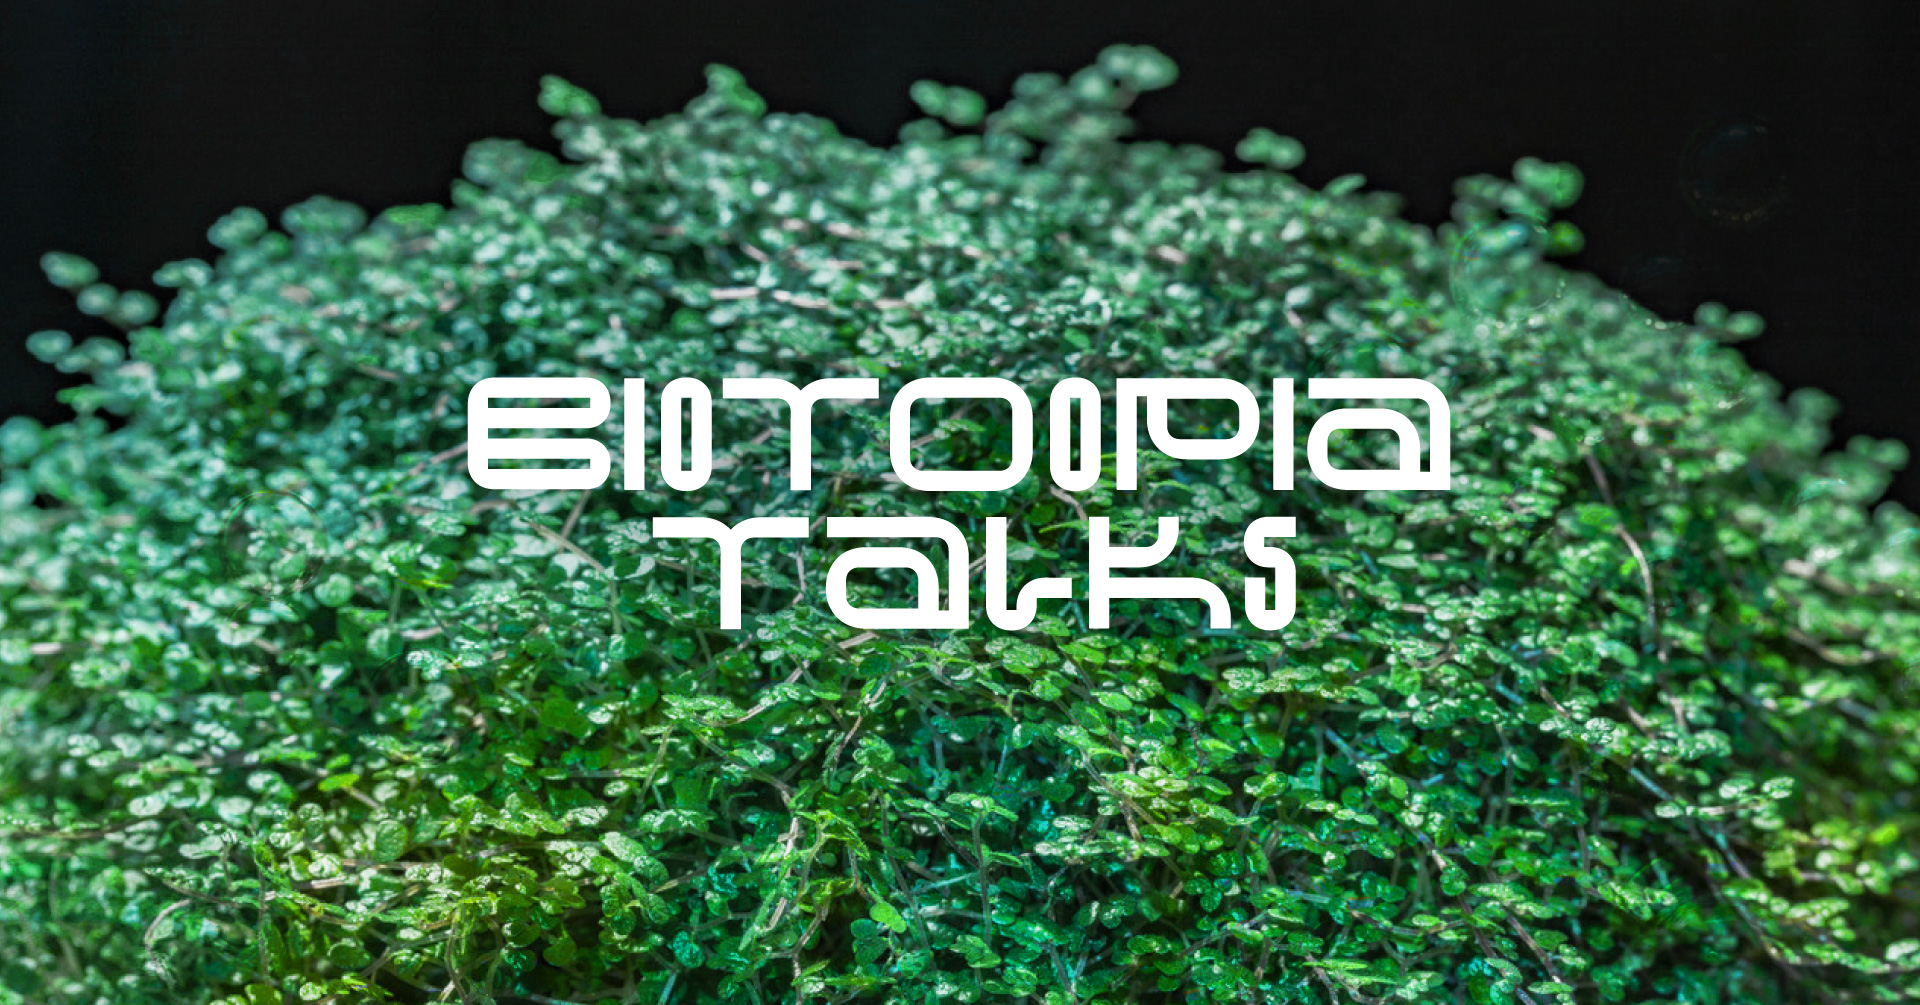 Upcoming Biotoopia Talks session focuses on the relationship between technology, art and nature